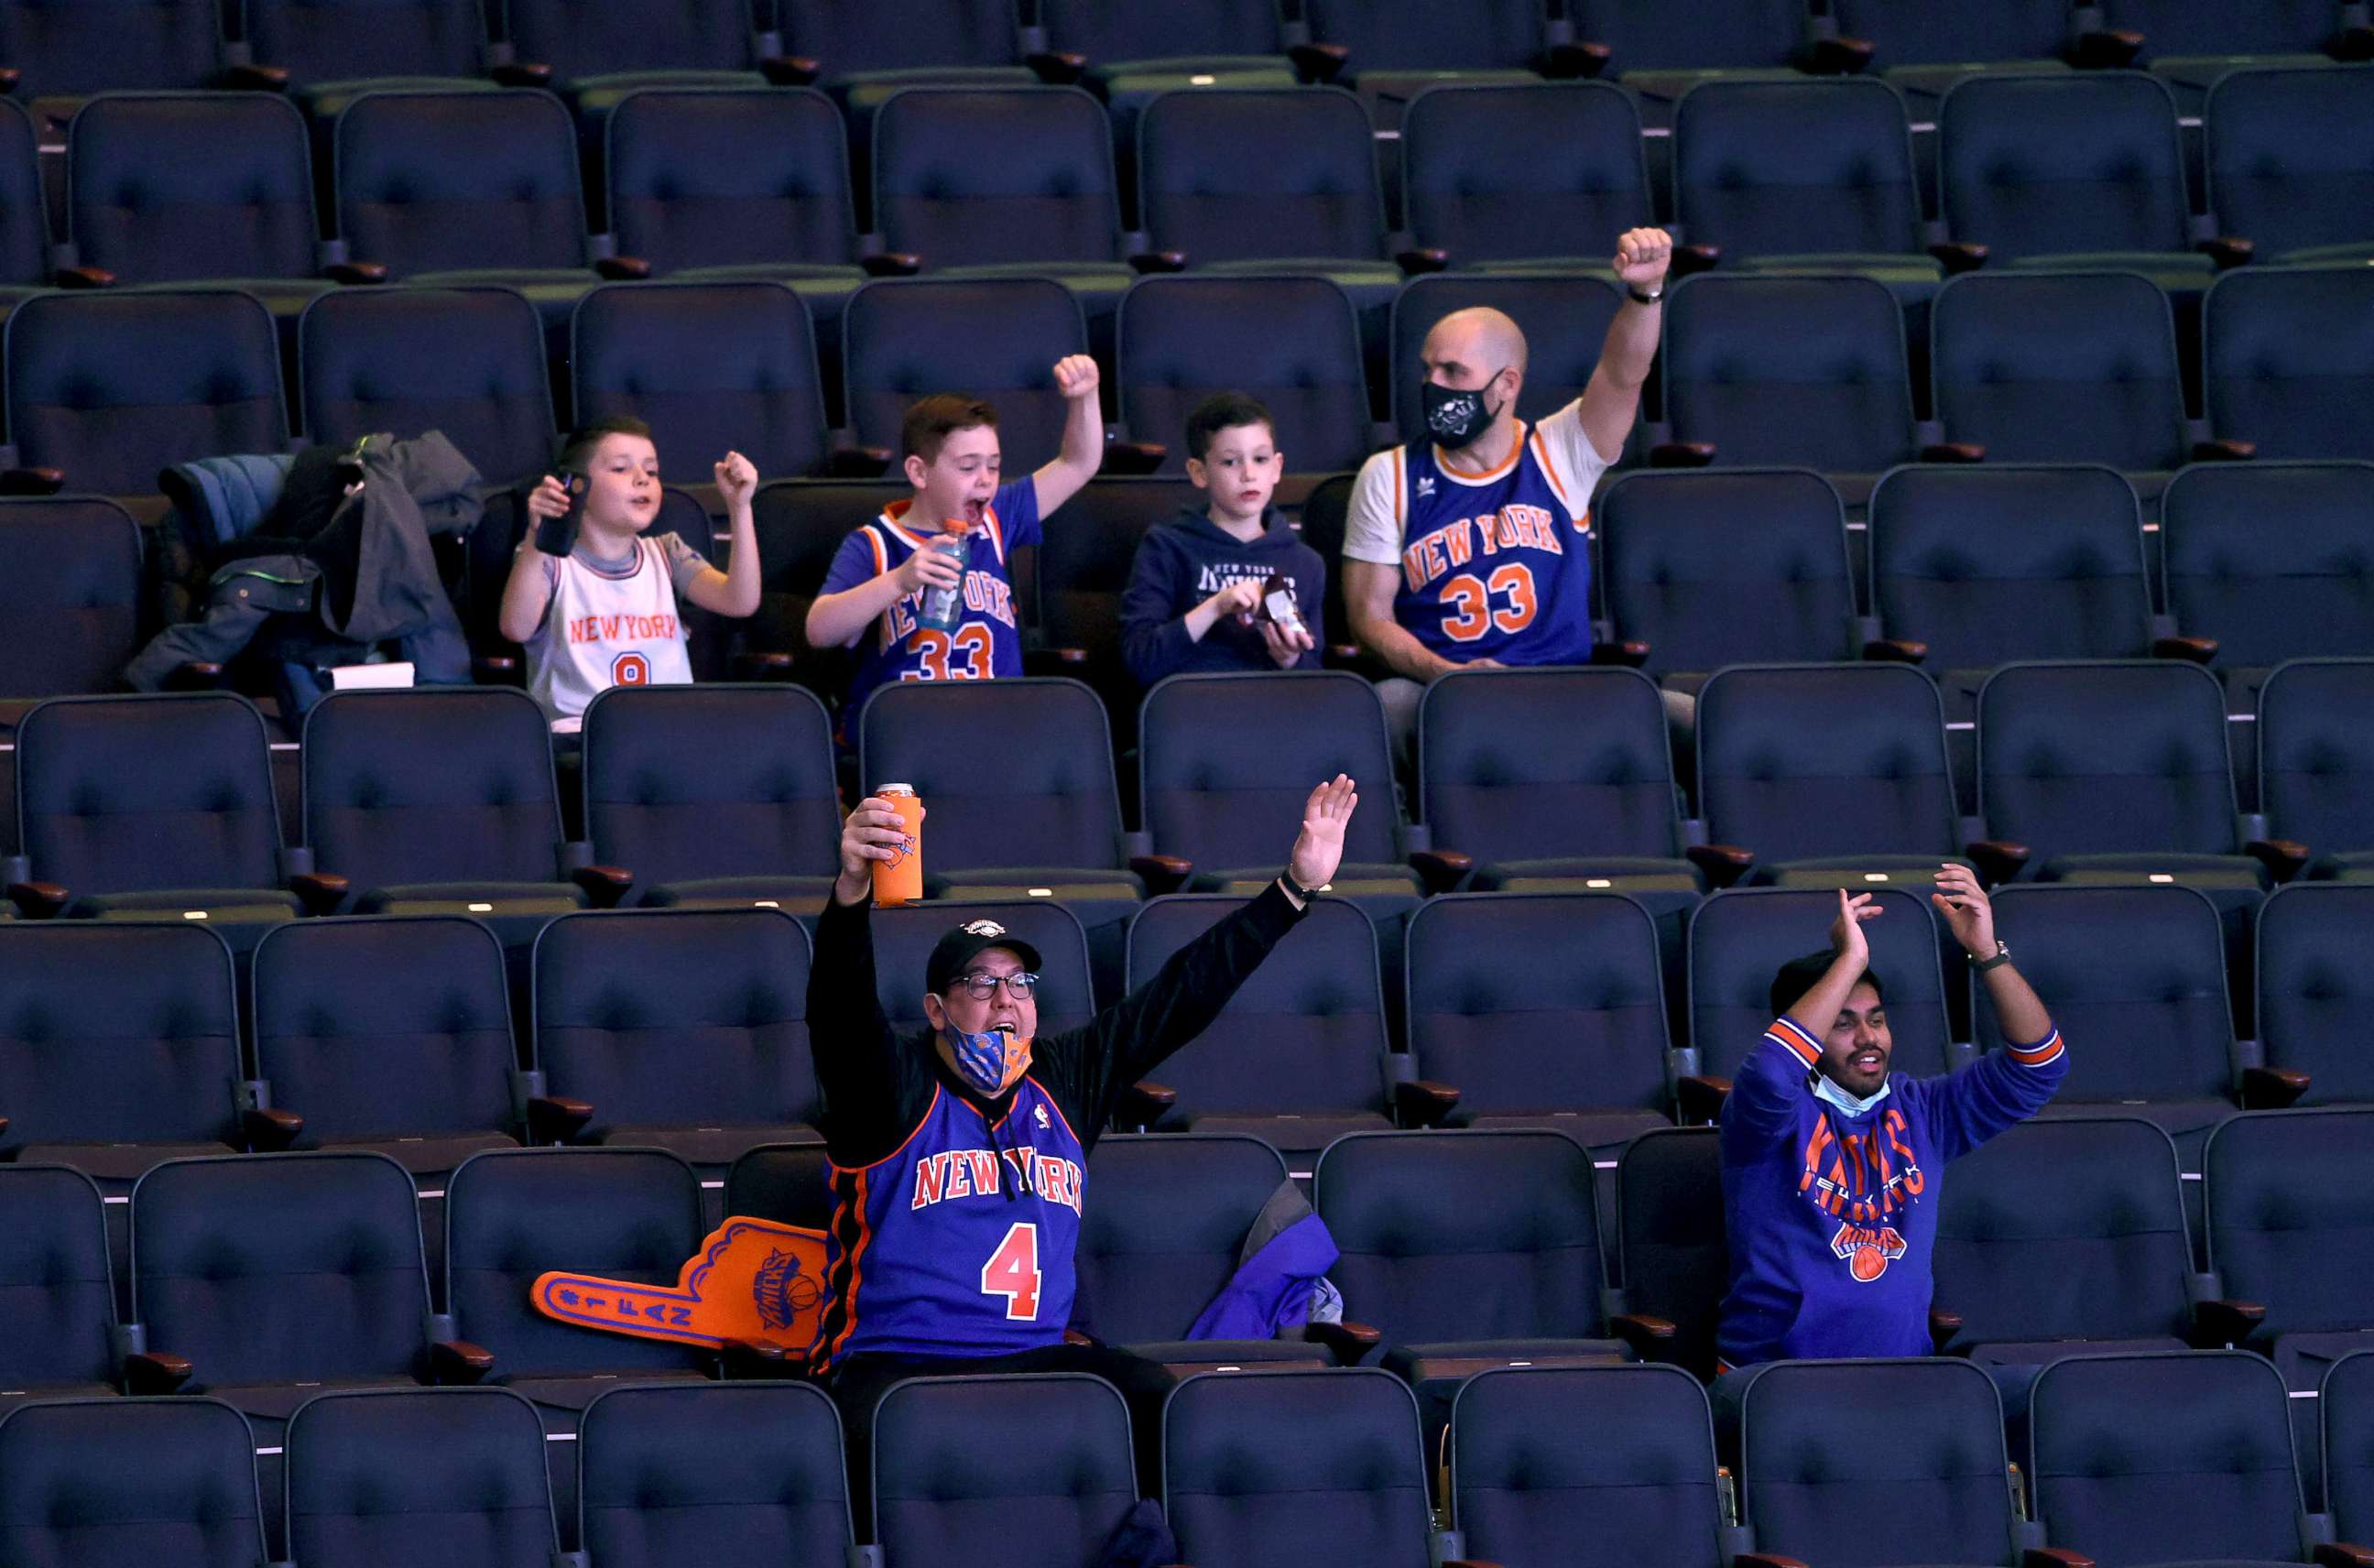 PHOTO: New York Knicks fans cheer as the team takes the court before the game against the Indiana Pacers at Madison Square Garden, Feb. 27, 2021, in New York City.